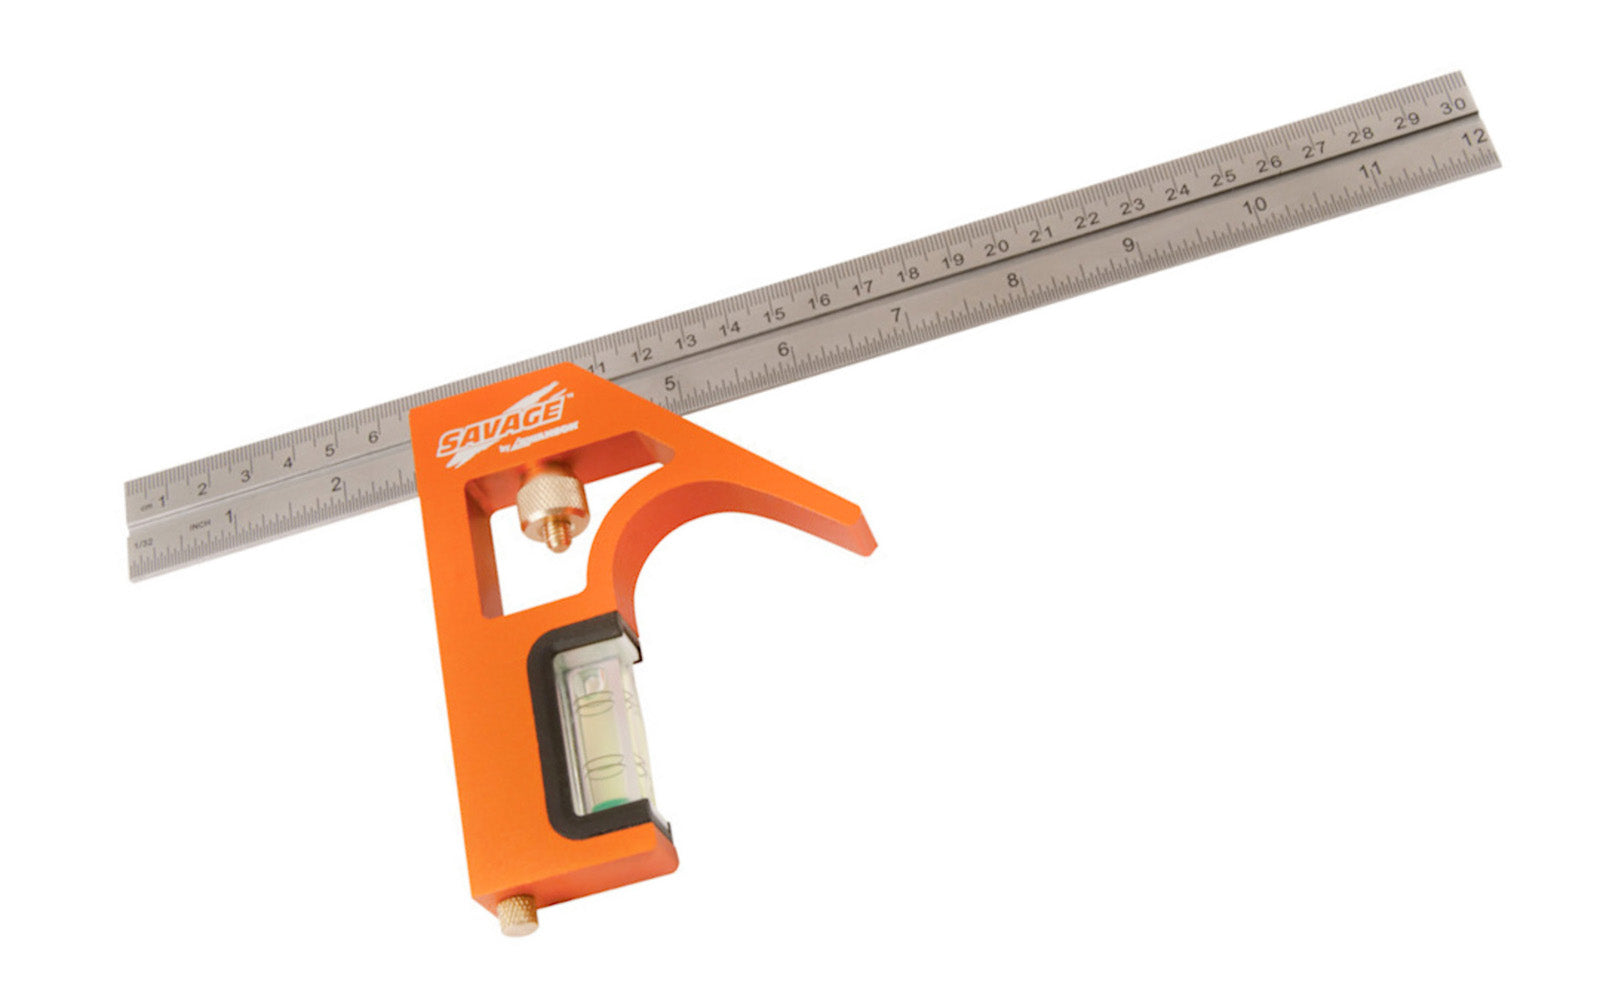 Swanson Savage 12" Combination Square is great for laying out lines for ripping, crosscutting, mitering, & making notches. The head, with fences at 90 & 45 degrees, slides along the blade & locks, allowing you to transfer a distance accurately & hold it while you draw a line with a pencil. Model SVC133. 038987941337